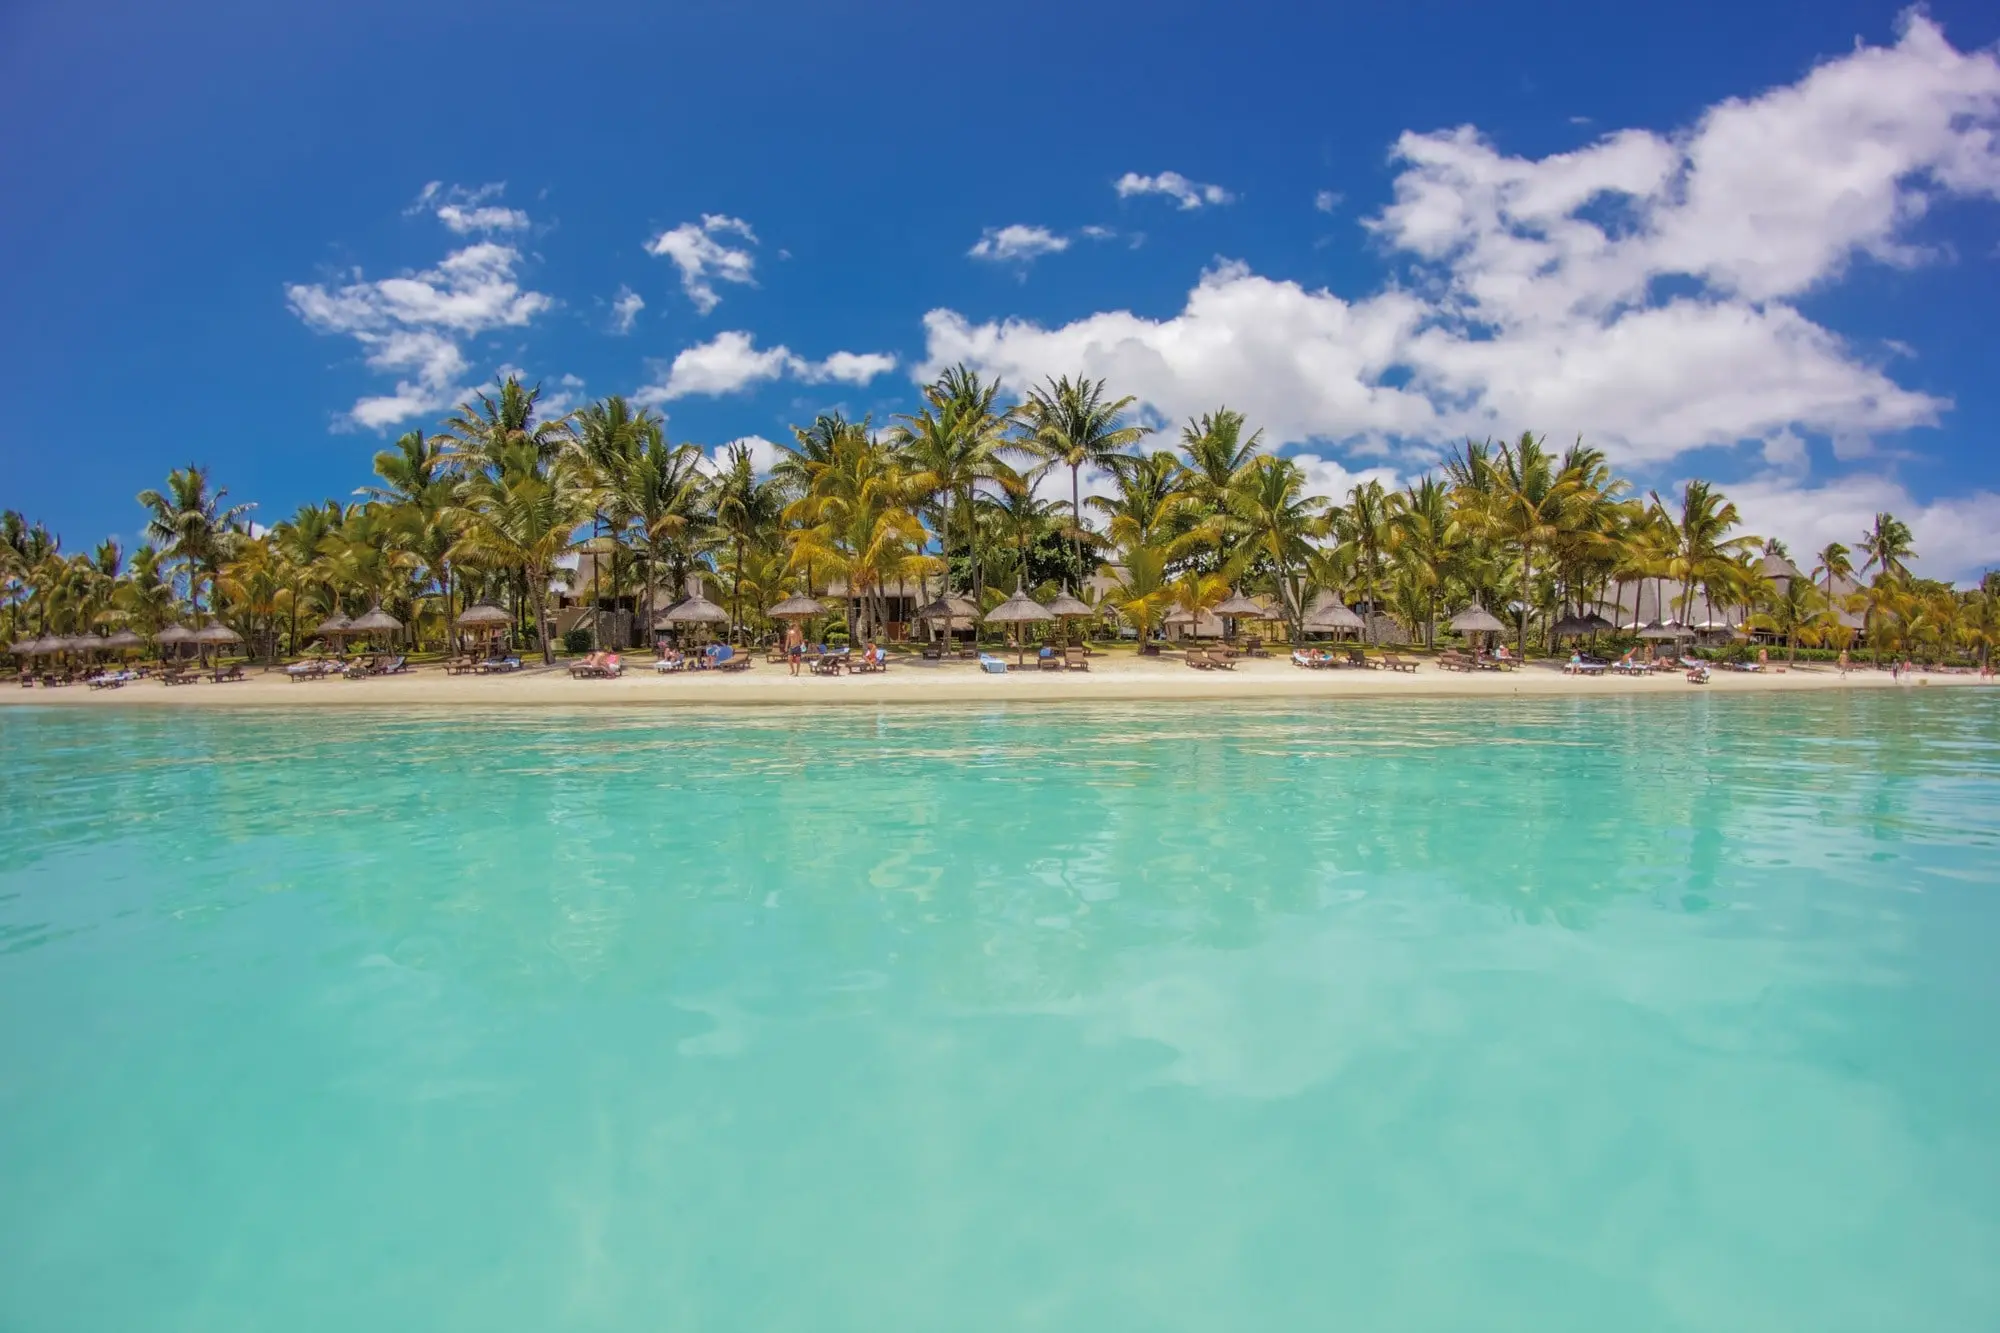 The Best Places To Have Tan Lines And Fun Times Under The Sun In Mauritius